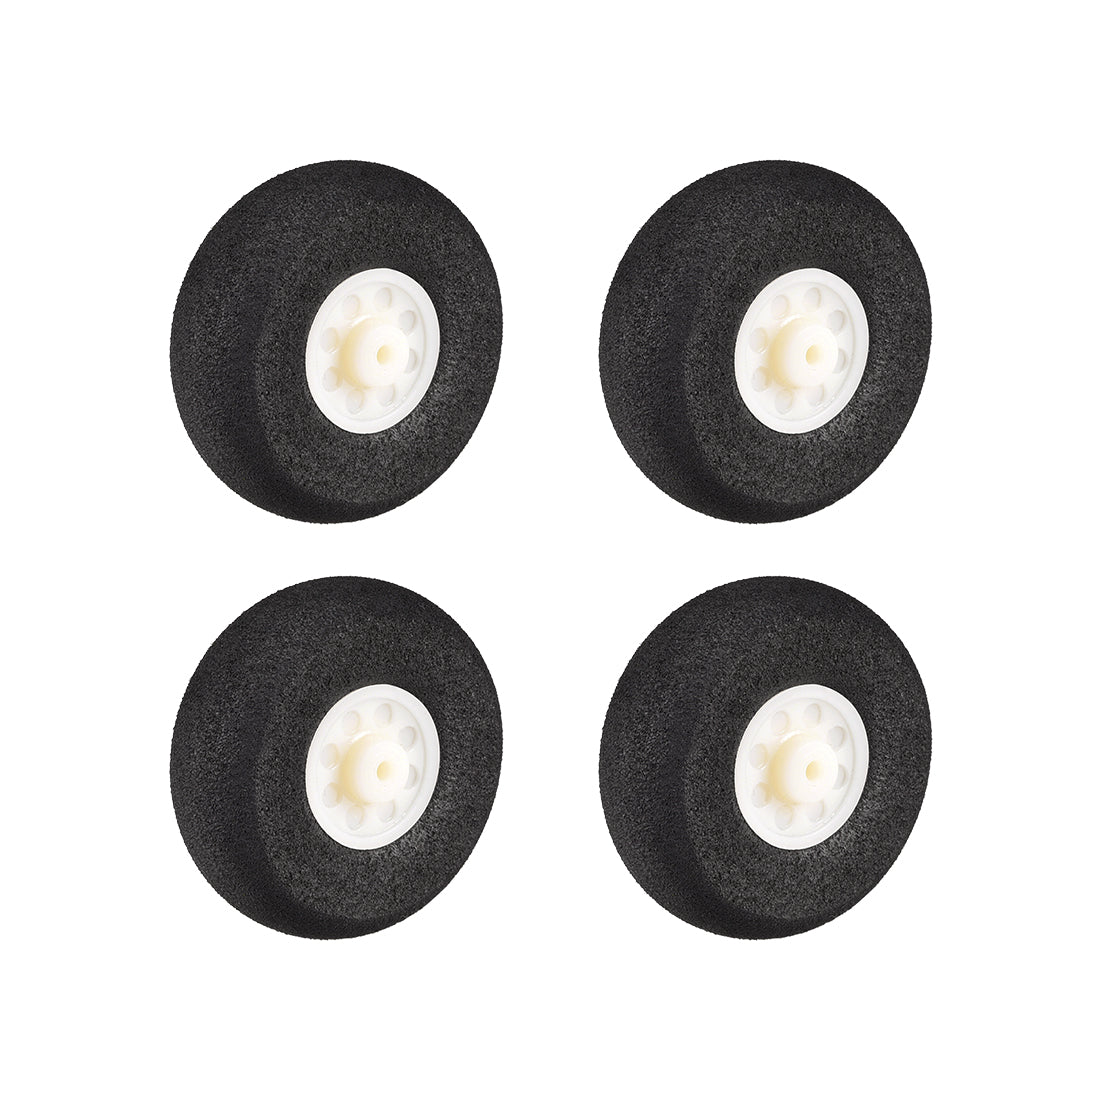 uxcell Uxcell RC Airplane Wheels - 4PCS RC Airplane Aircraft Sponge Wheels 1.5 inch x 0.08 inch